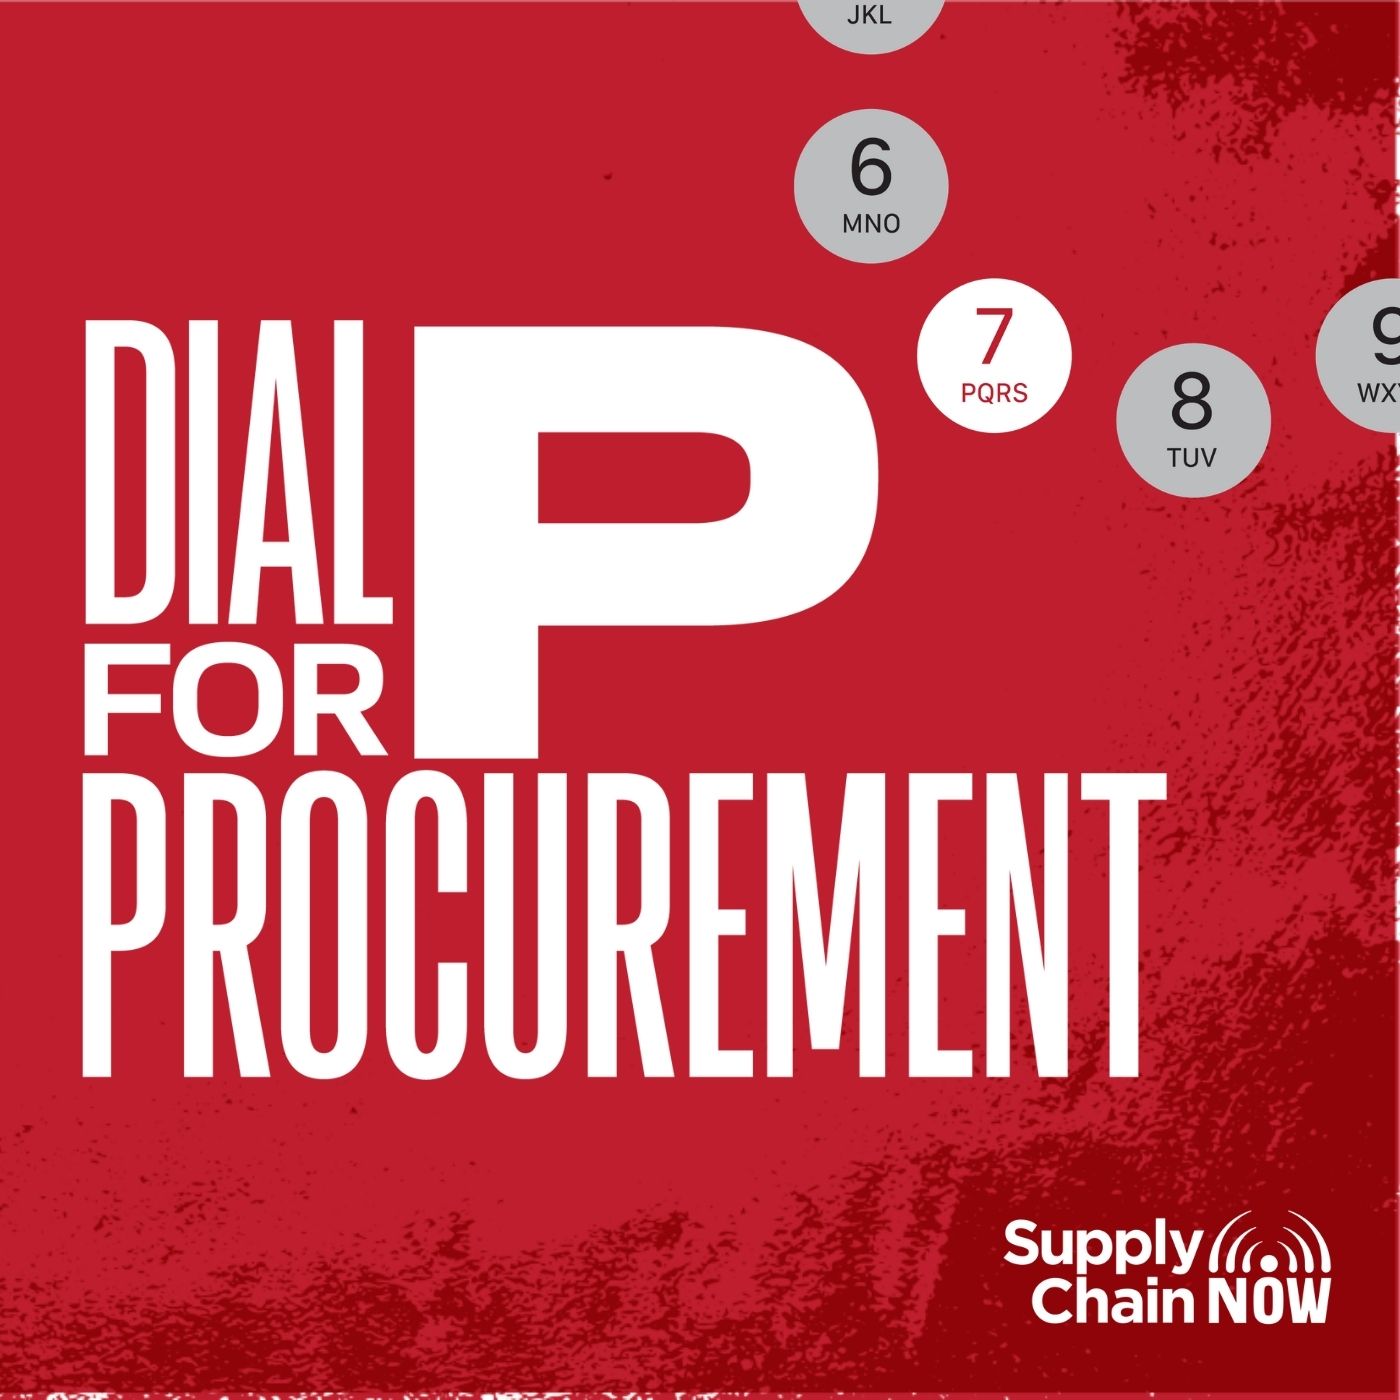 Artwork for Dial P for Procurement